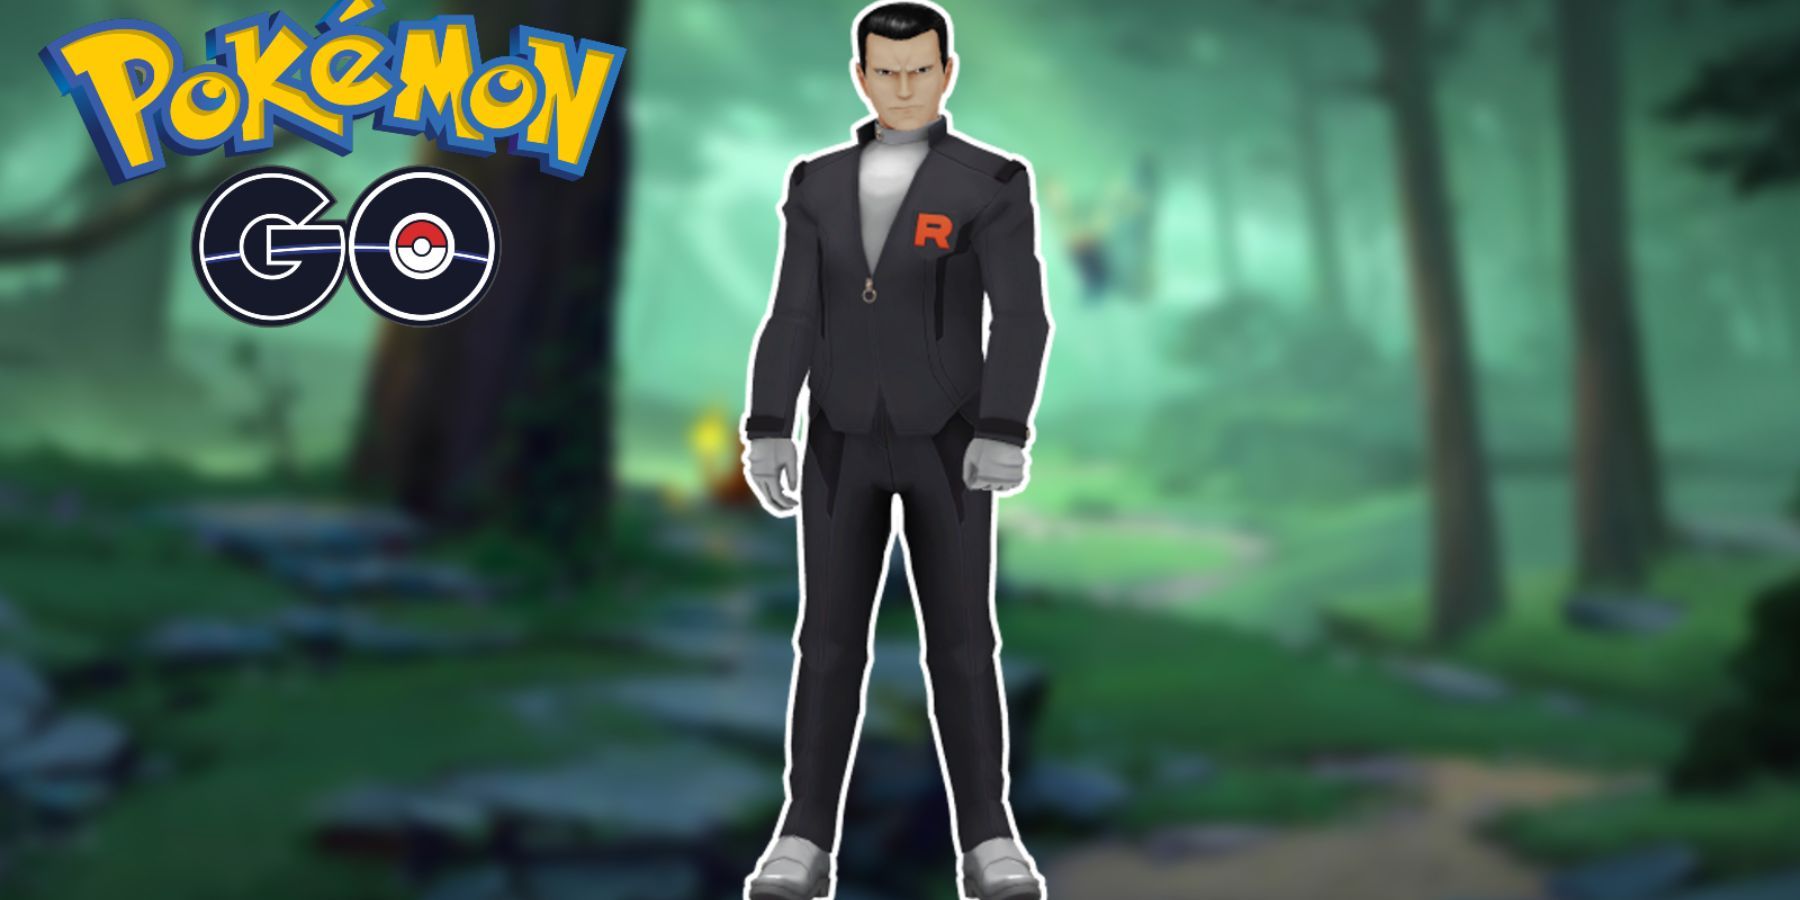 Team Rocket boss Giovanni stands in a forested area with the Pokemon GO logo to his left